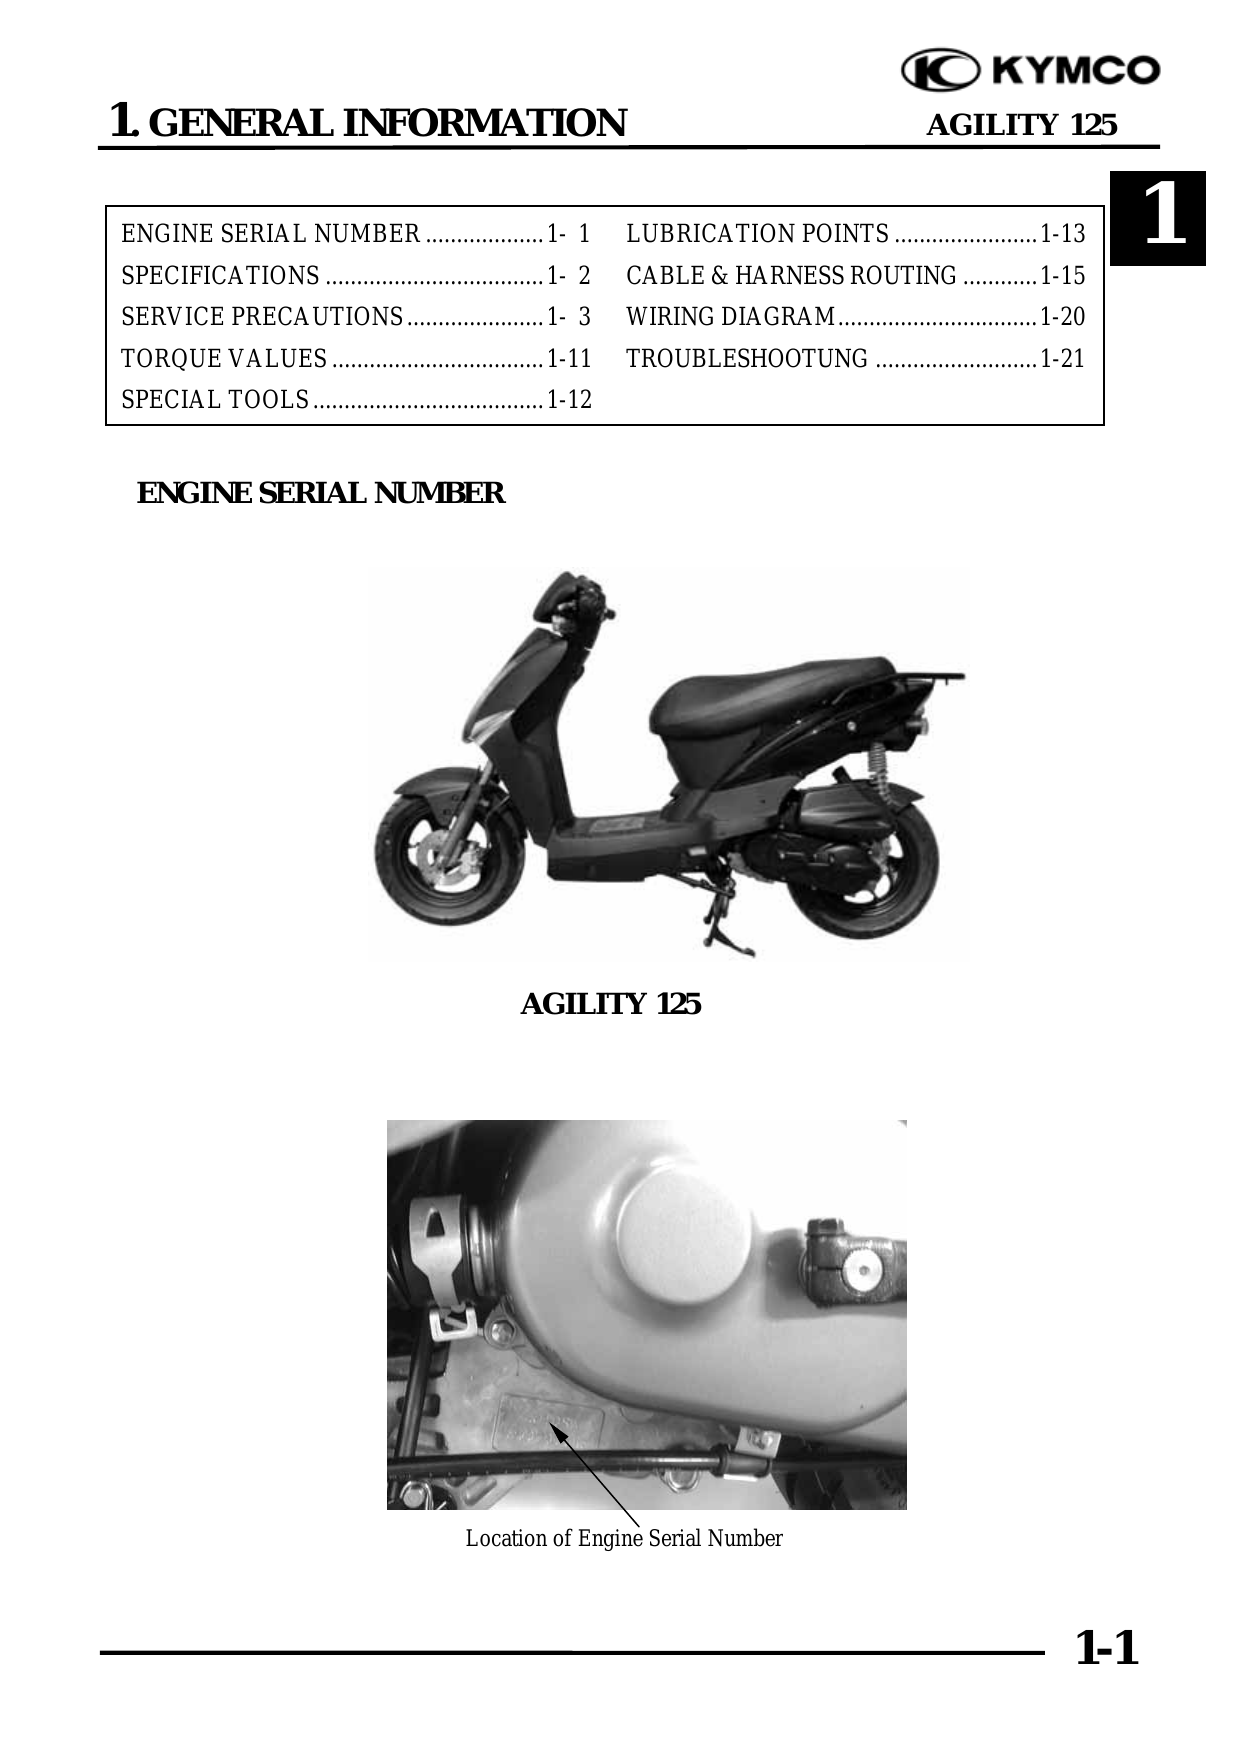 Kymco Agility 125 scooter service, repair manual Preview image 2